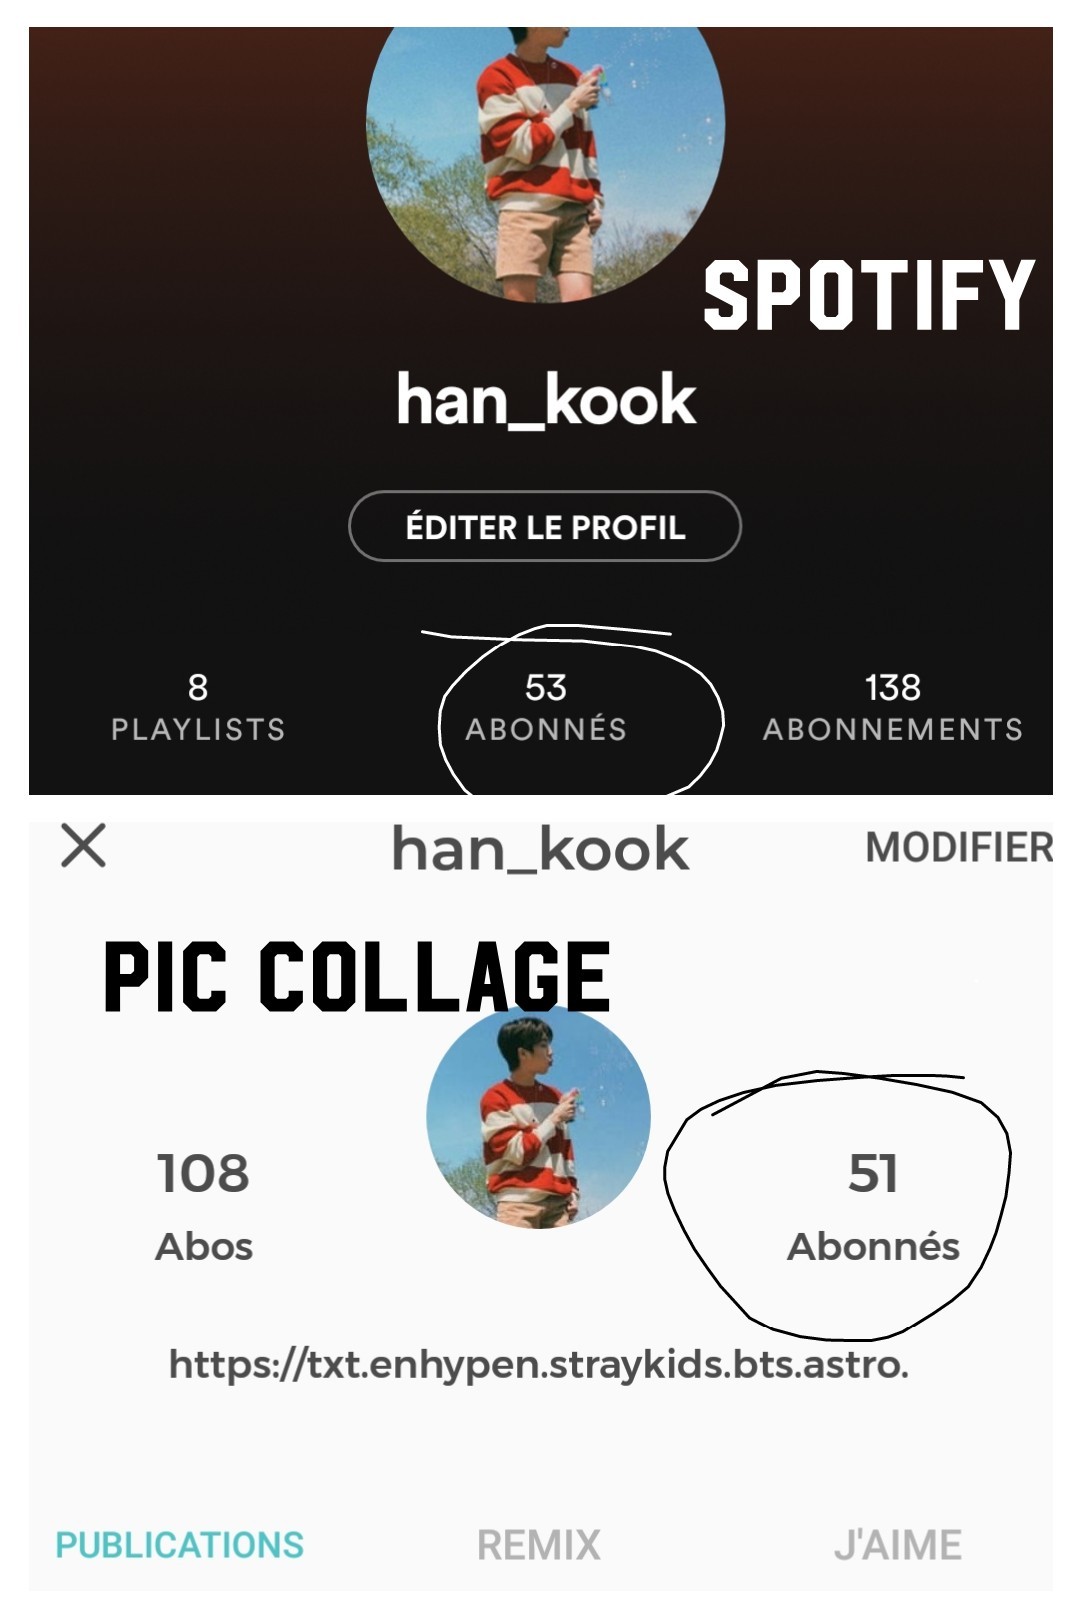 I officially have more followers on Spotify than on Pic collage, I never think at this XD 